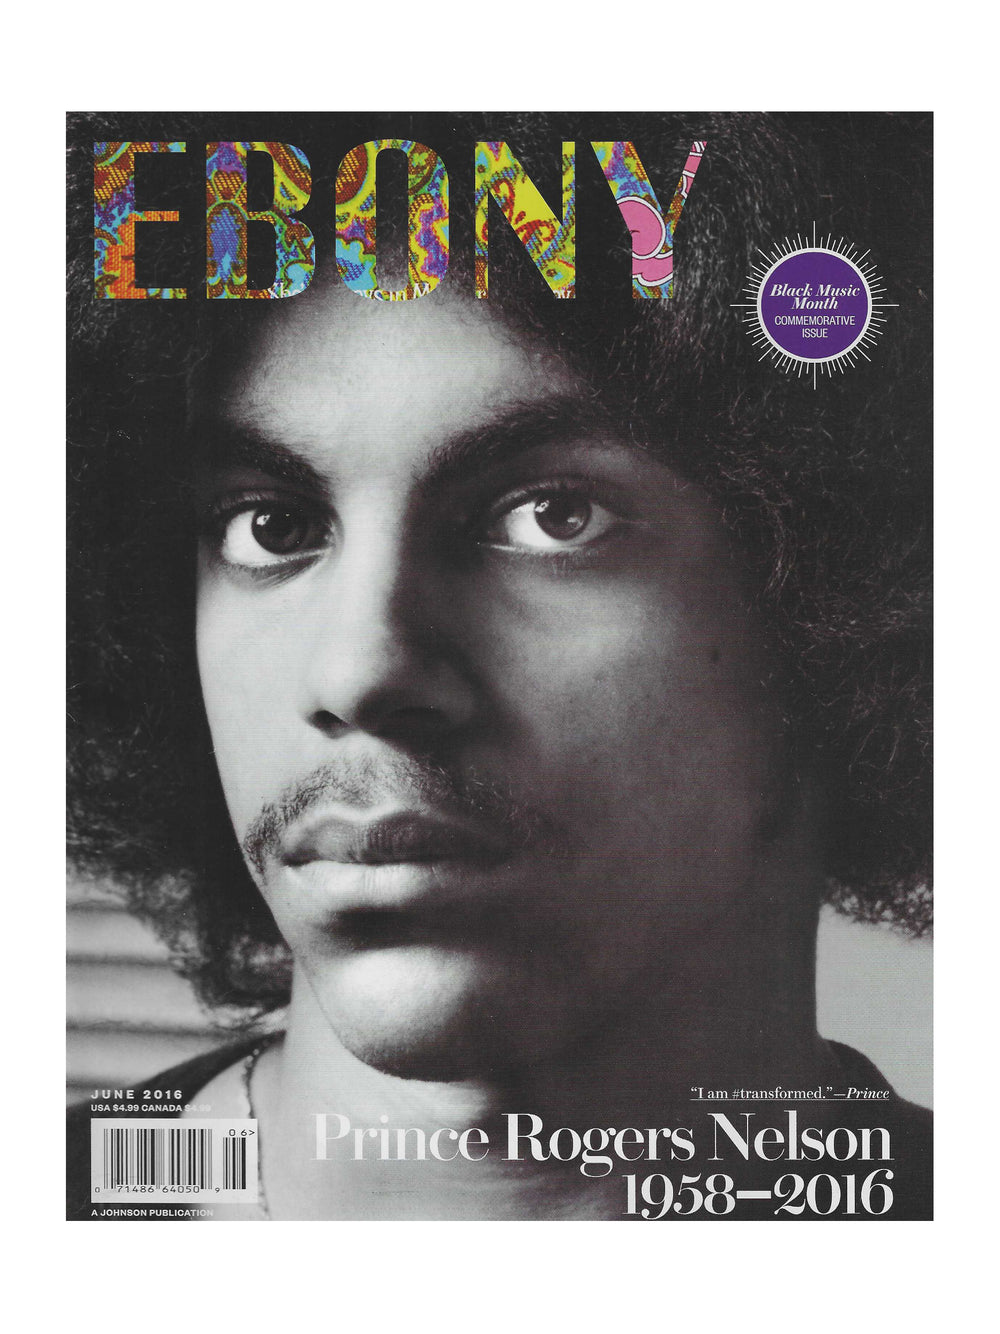 Prince – Rogers Nelson Ebony Magazine June 2016 Cover & 37 Pages Incredible Issue